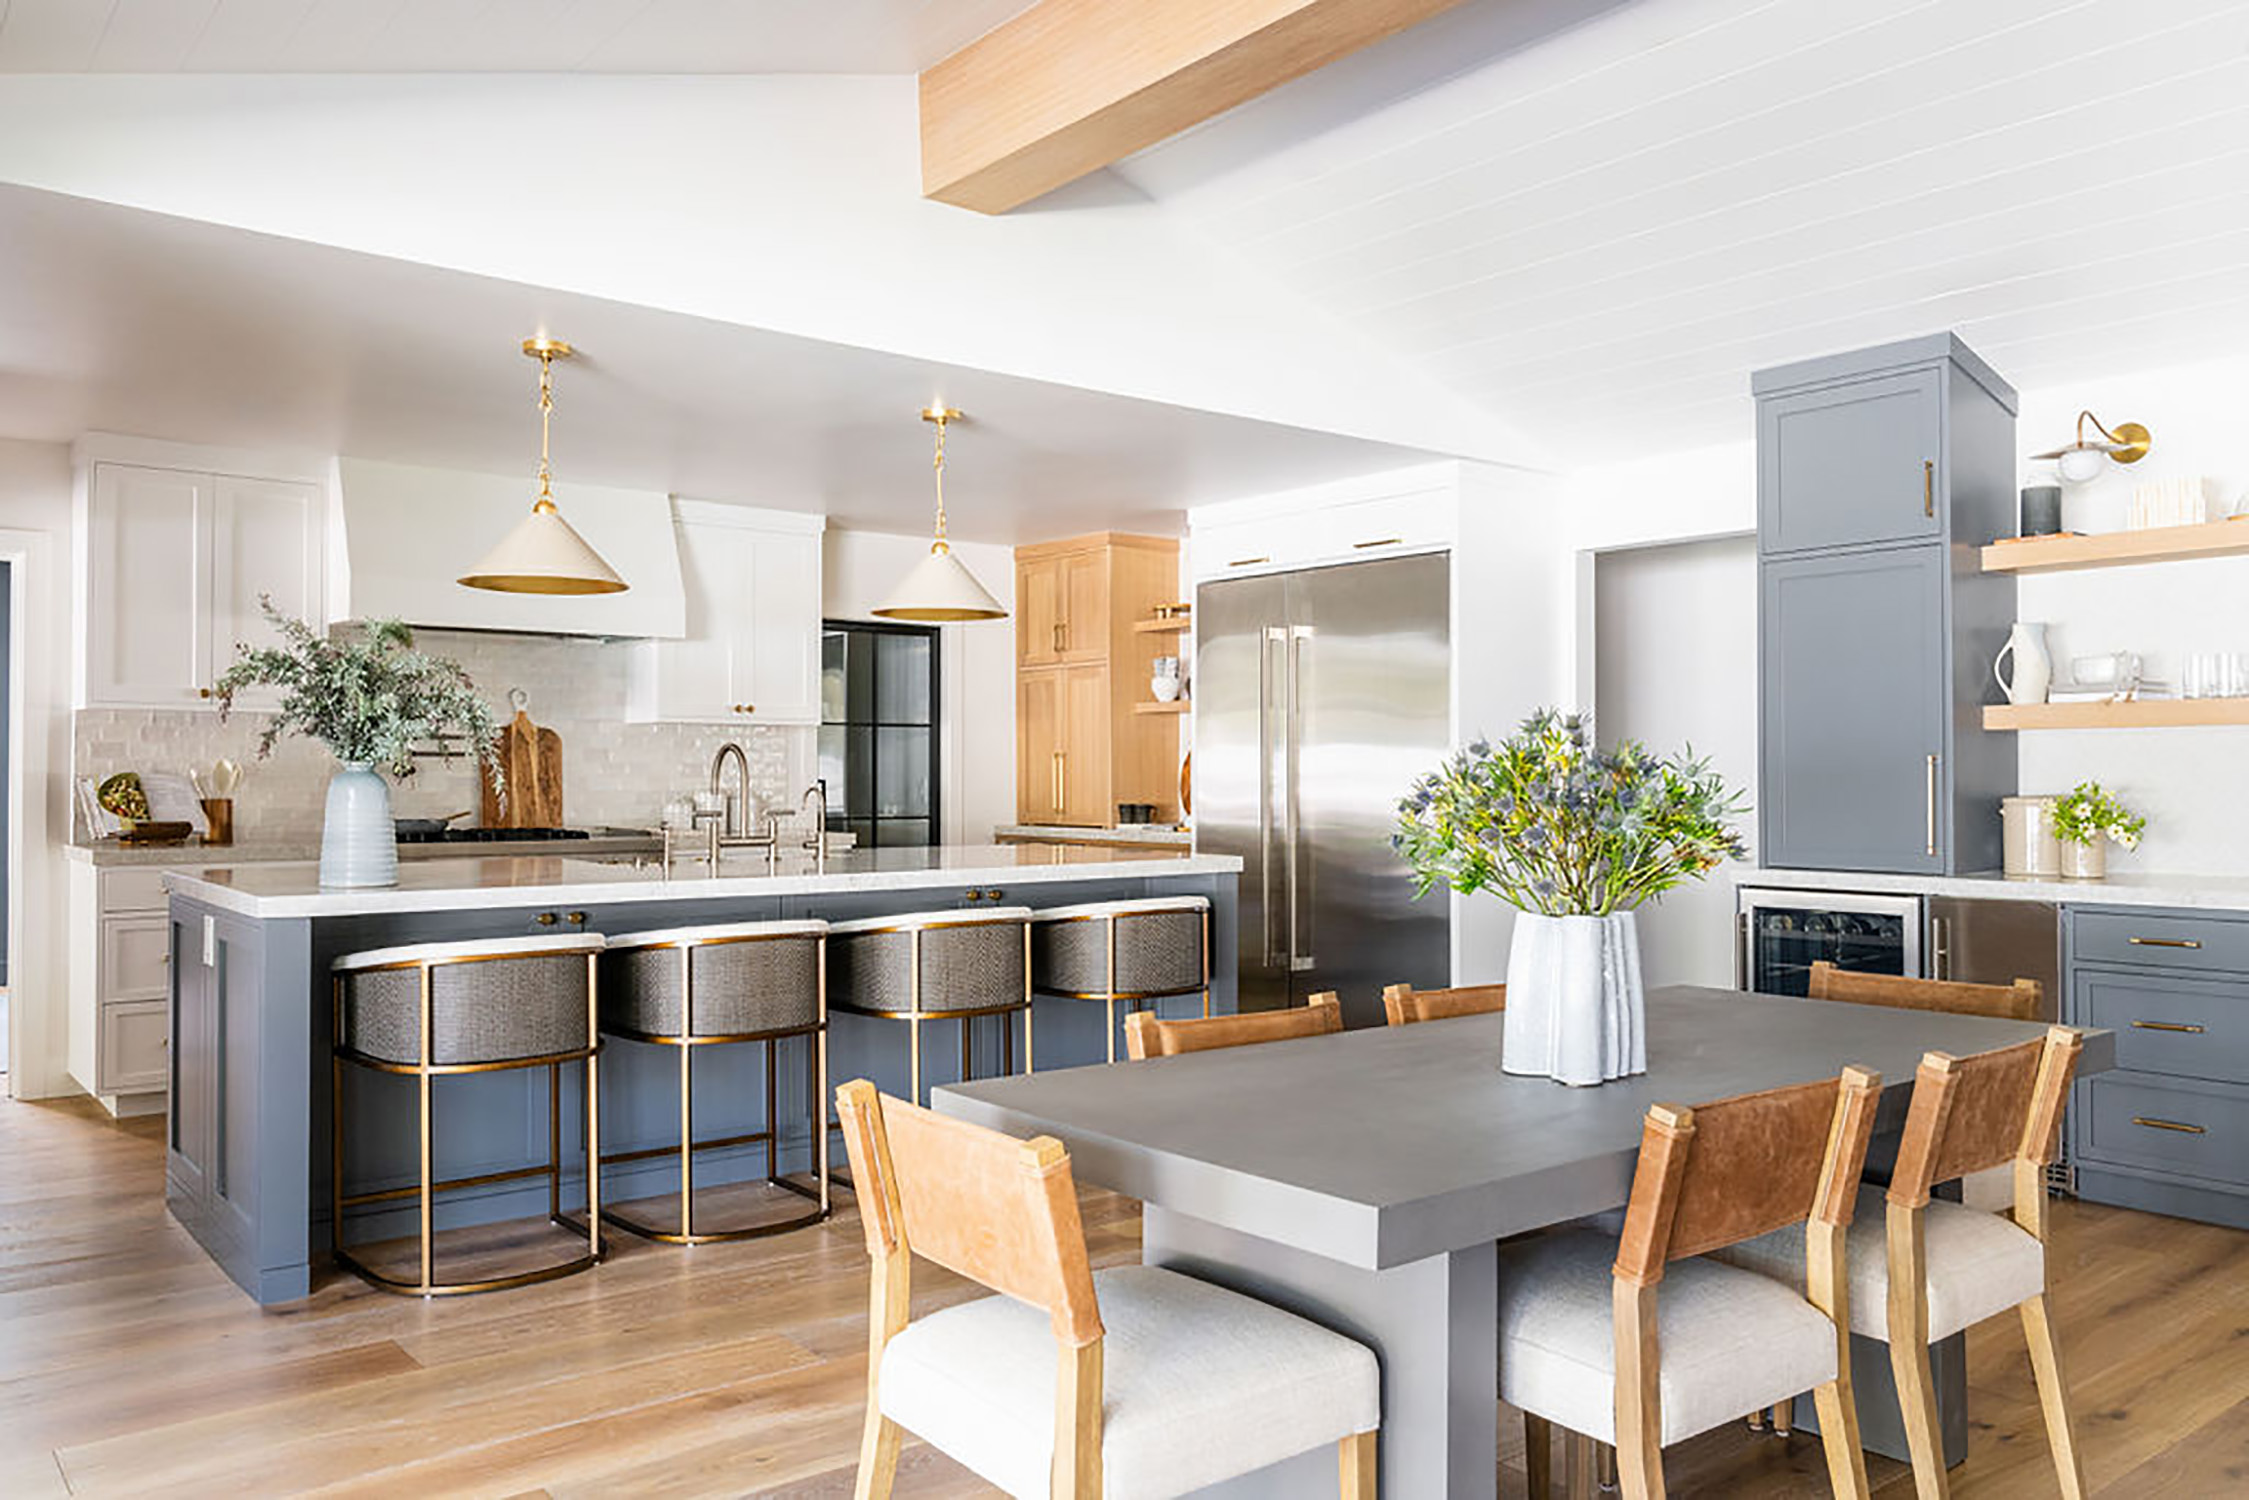 modern bright kitchen design with open beam ceiling and hanging lights over the island